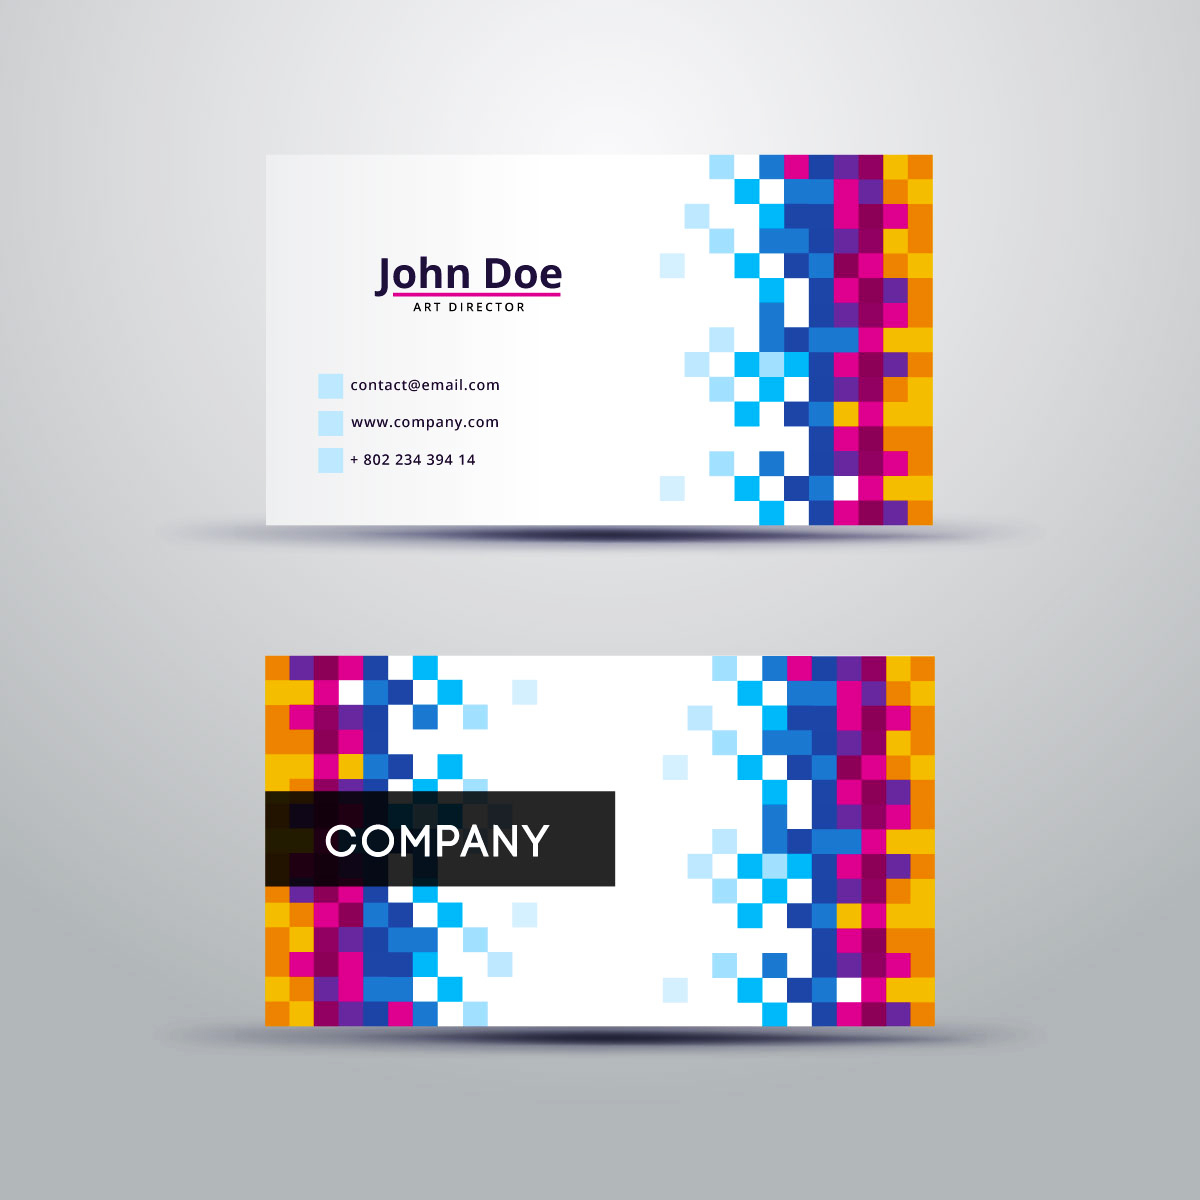 Colorful-pixelated-business-card